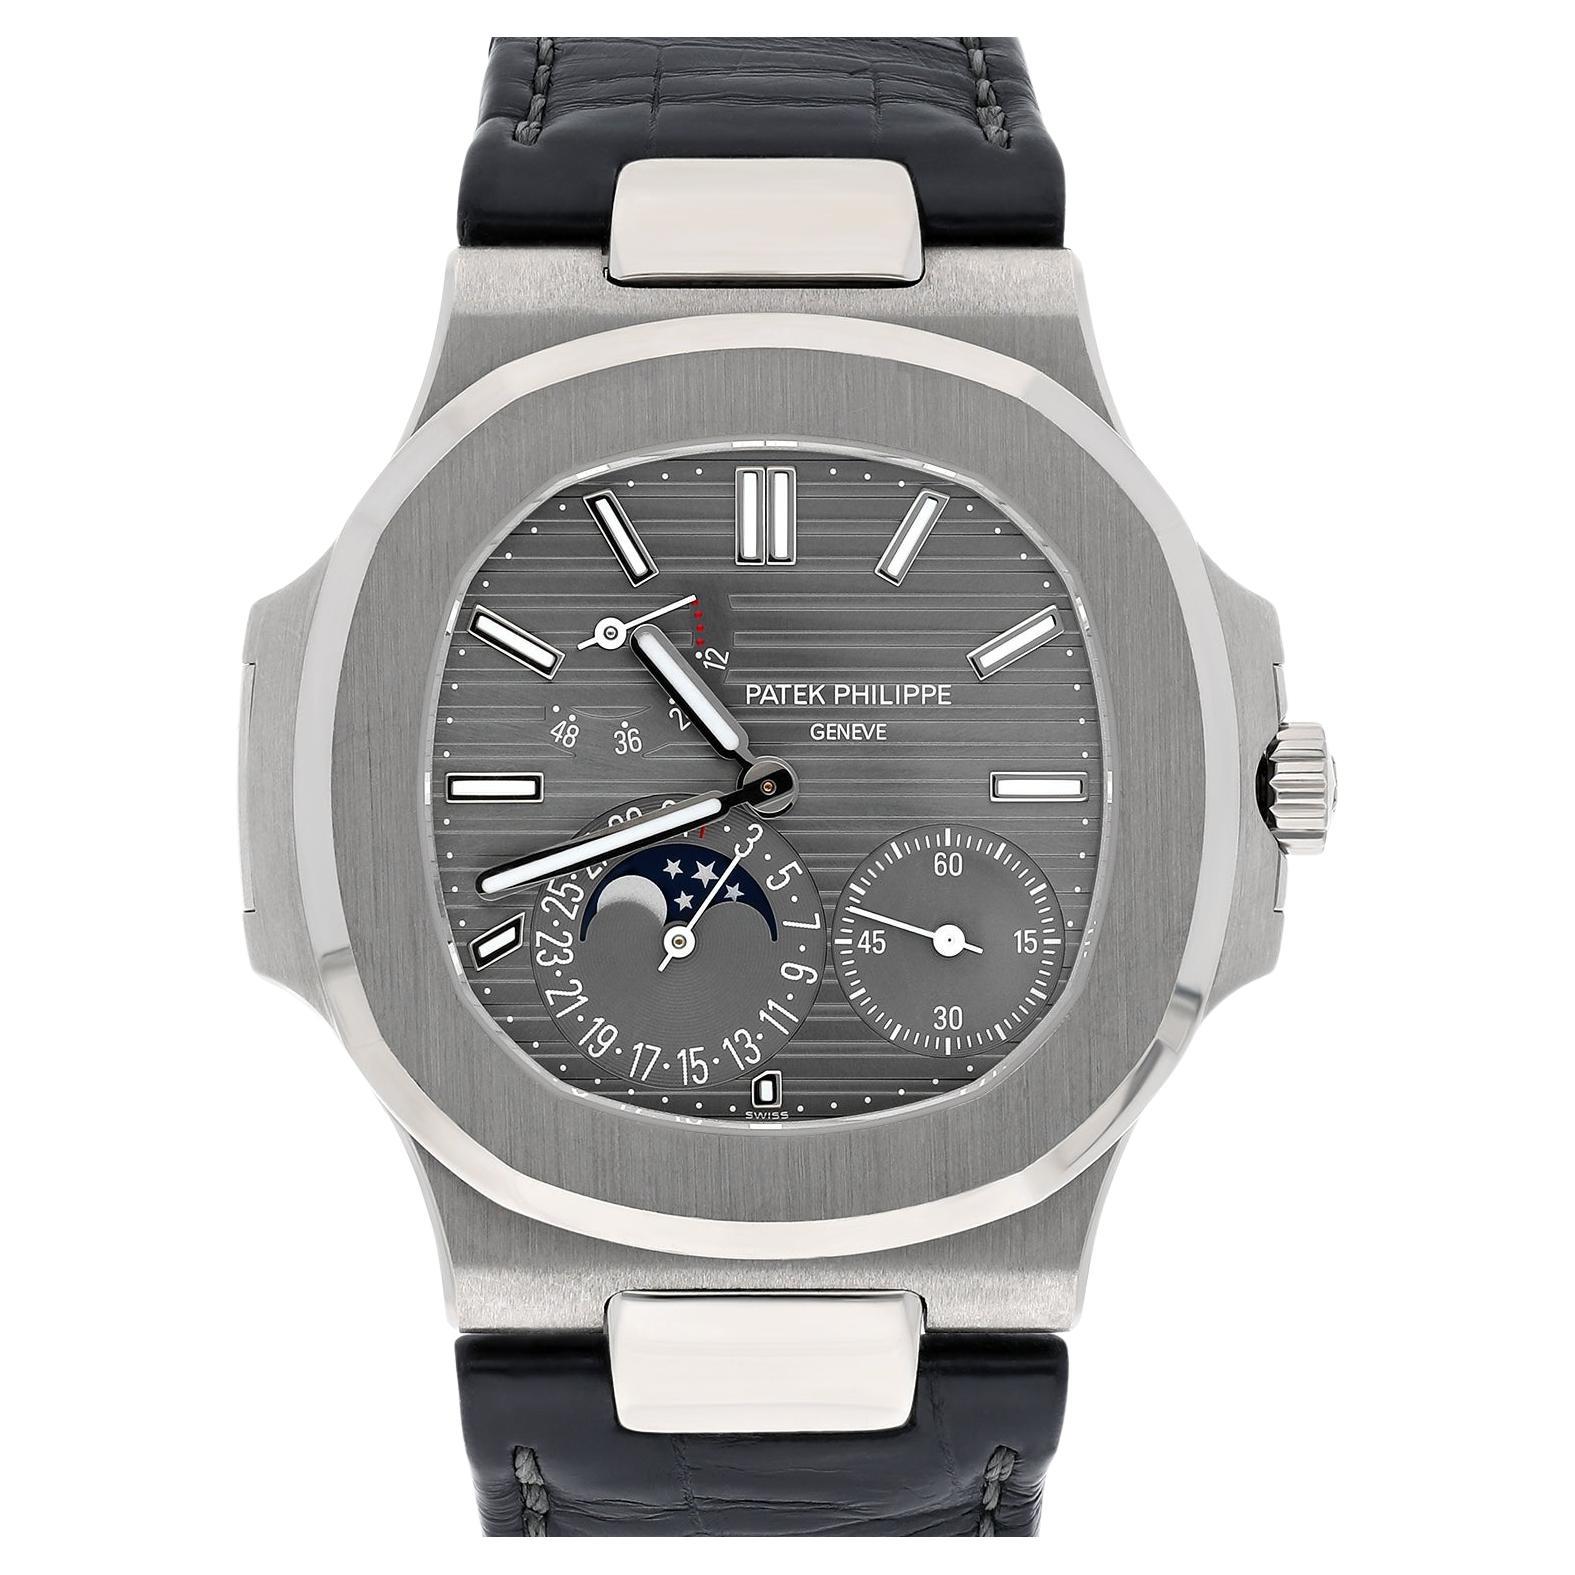 Patek Philippe Nautilus Moonphase White Gold Mens Watch Grey Dial 5712G-001 For Sale